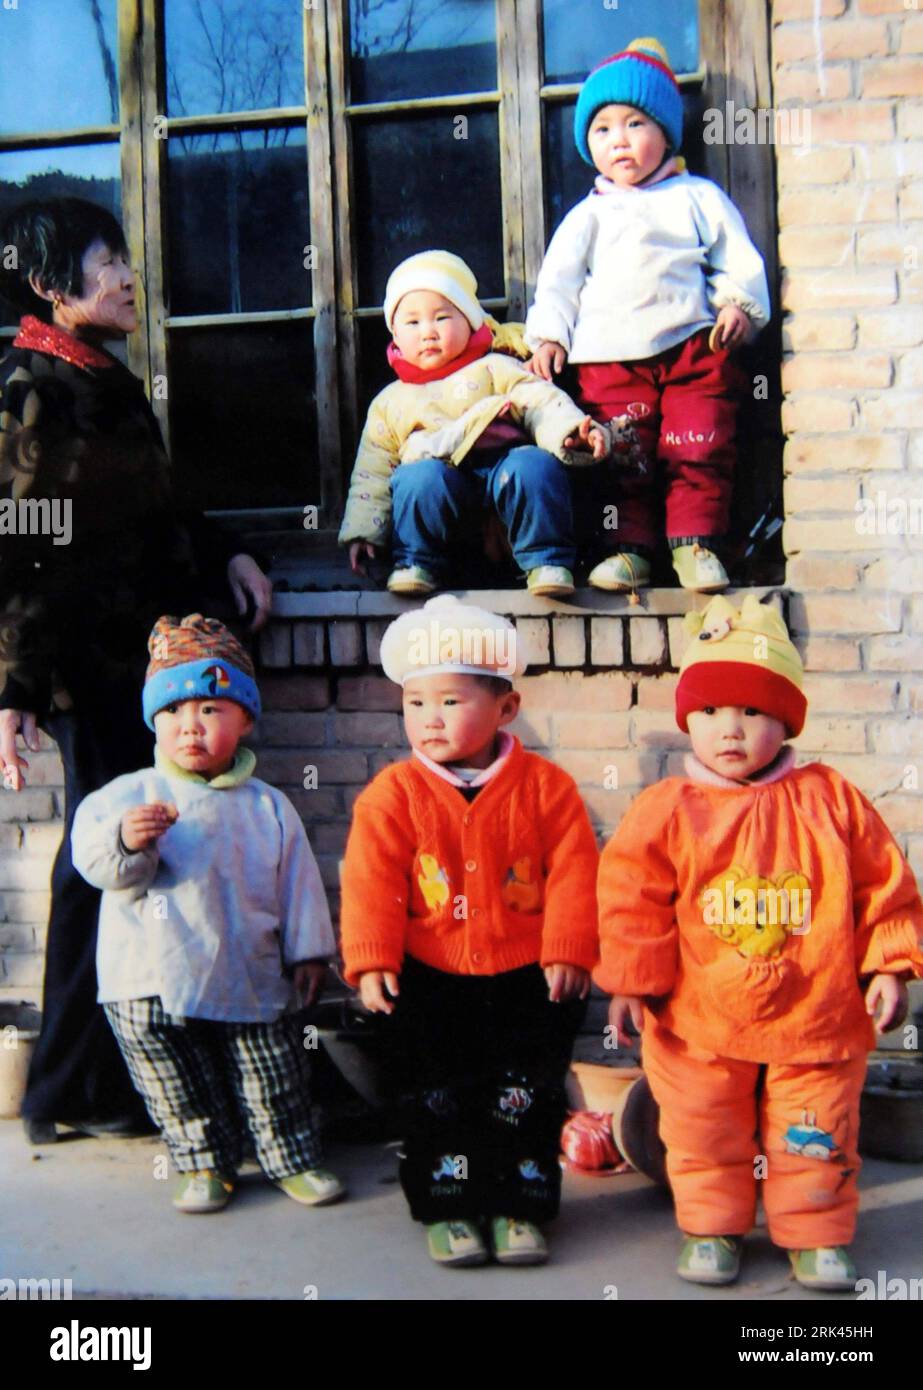 Bildnummer: 53588561  Datum: 30.10.2009  Copyright: imago/Xinhua  Photo taken on Oct. 30, 2009 shows a photo of quintuplets children of Jiao Baocun and his wife Wang Cuiying when they were young. Wang, from Zhenshang Village, four hours bus ride from Shijiazhuang, provincial capital of Hebei, became well-known nationwide for giving birth to five children, two boys and three girls, via Caesarean operation in one delivery at Beijing Maternity Hospital on March 4, 2002. A member of Buddhist Association of China gave names Fuqing, Fuli, Fuxin, Fusen and Fuyuan to the children. When the children we Stock Photo